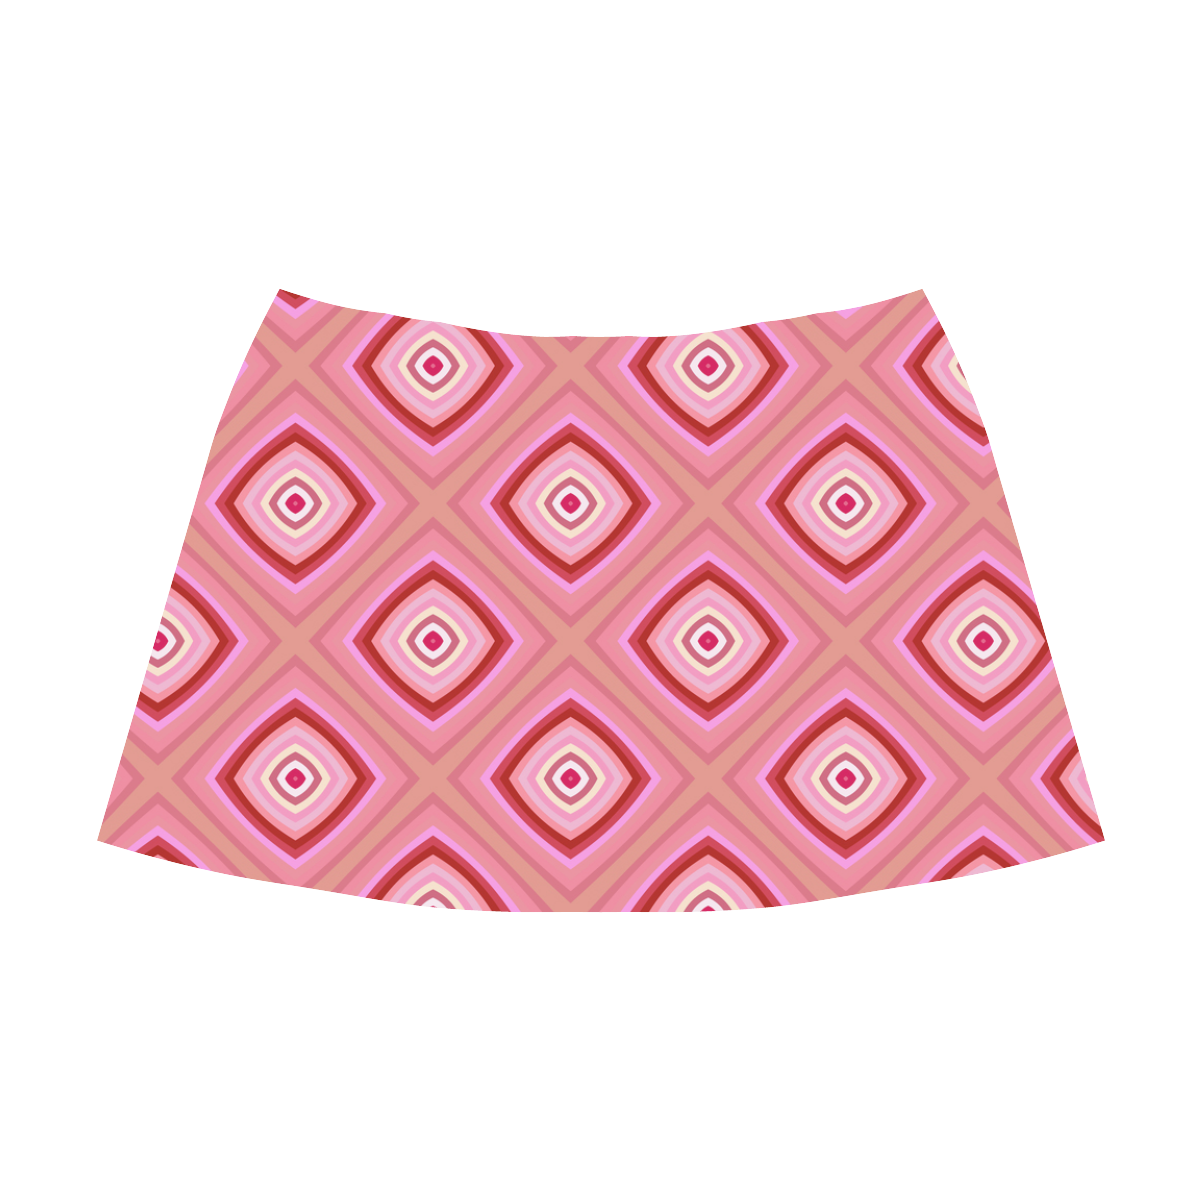 pink and red  geometric pattern Mnemosyne Women's Crepe Skirt (Model D16)